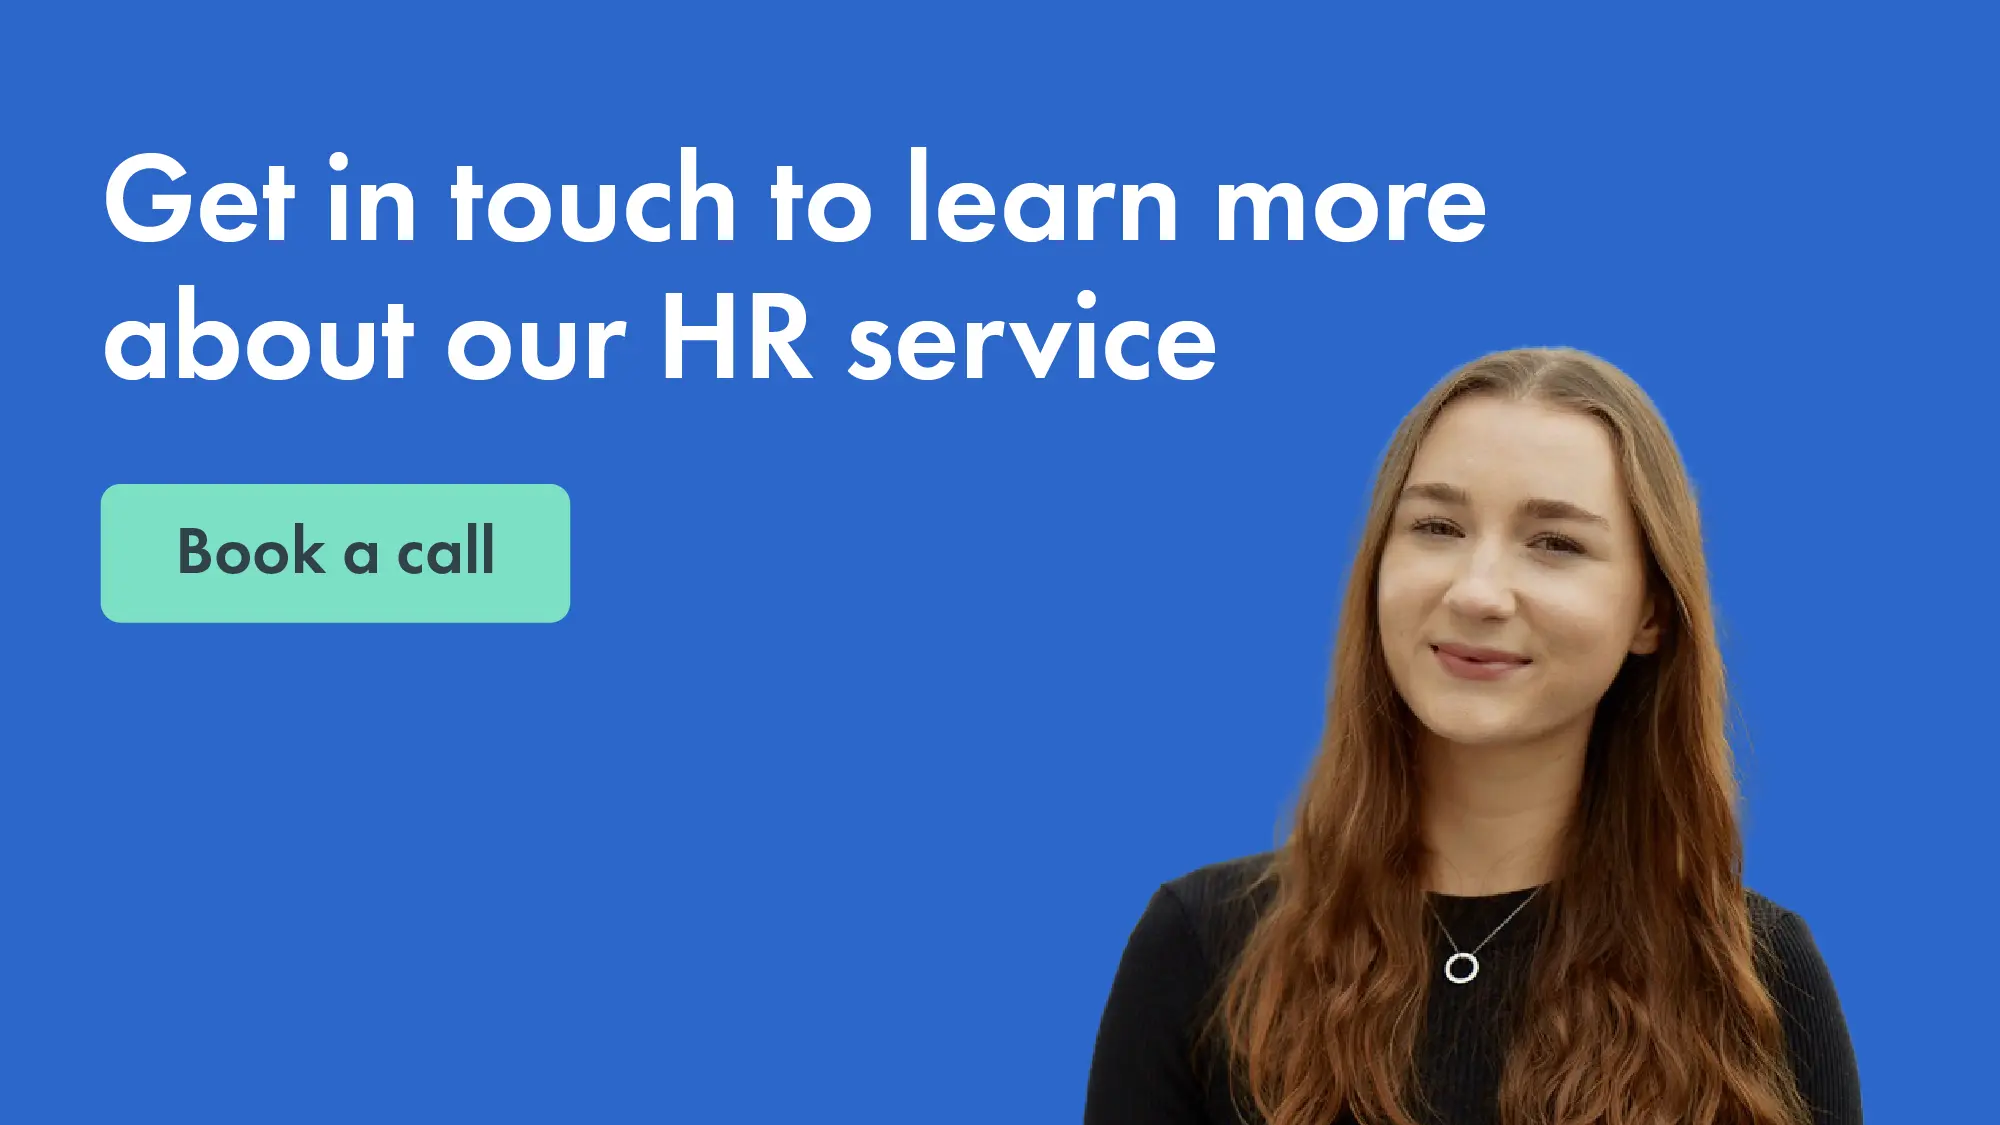 Click here to book a call with our HR Advice team